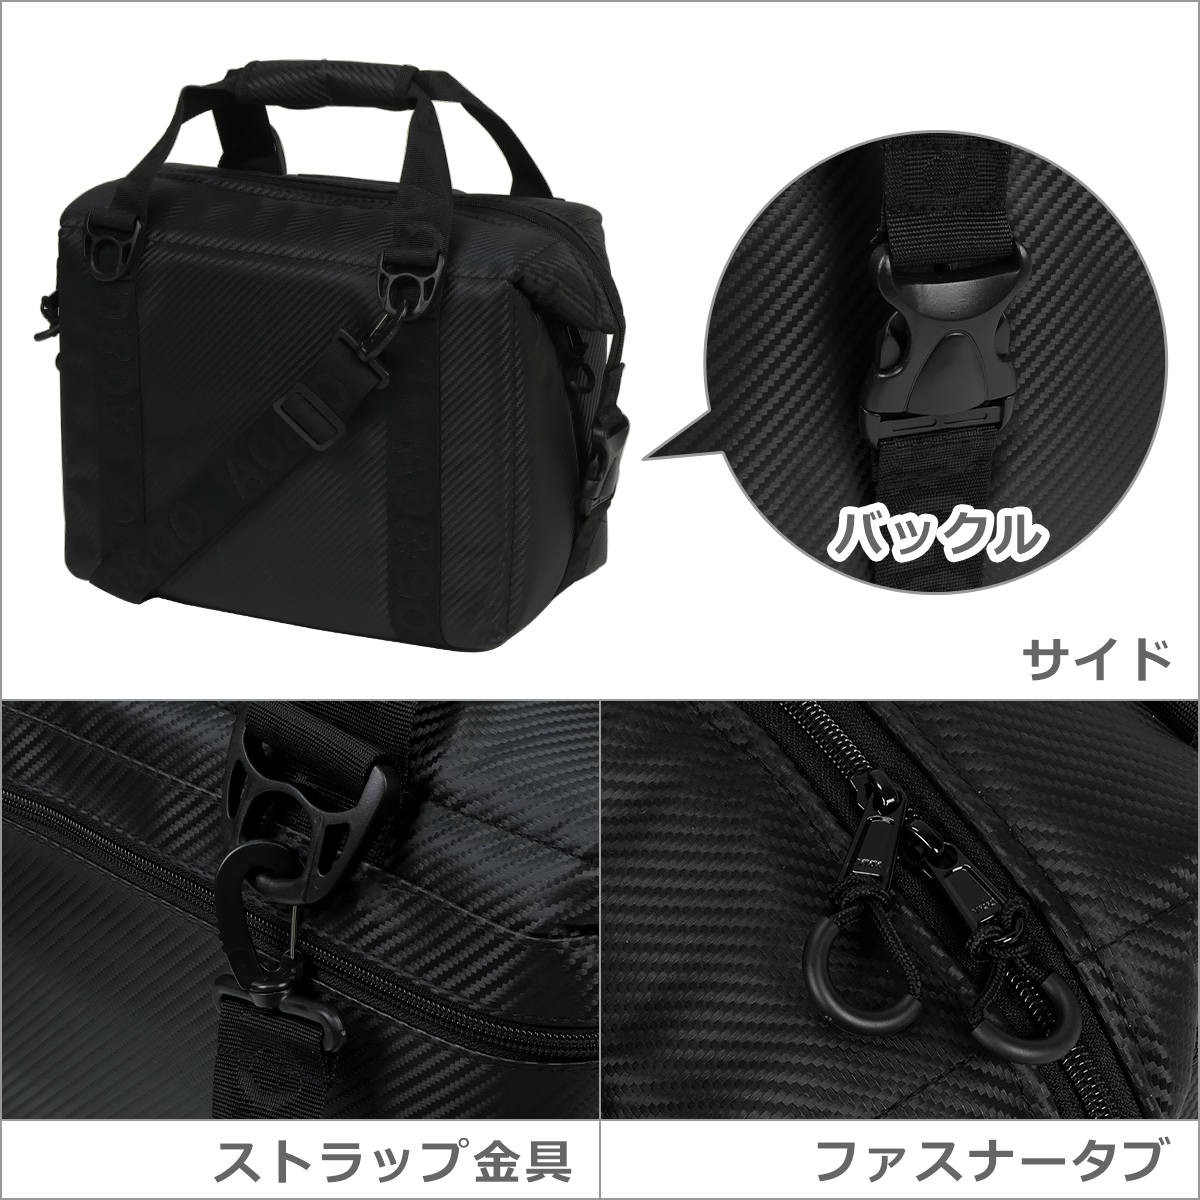 85%OFF!】AOクーラーズ AO Coolers PACK CARBON 12 クーラーボックス Coolers AO カーボン アウトドア 